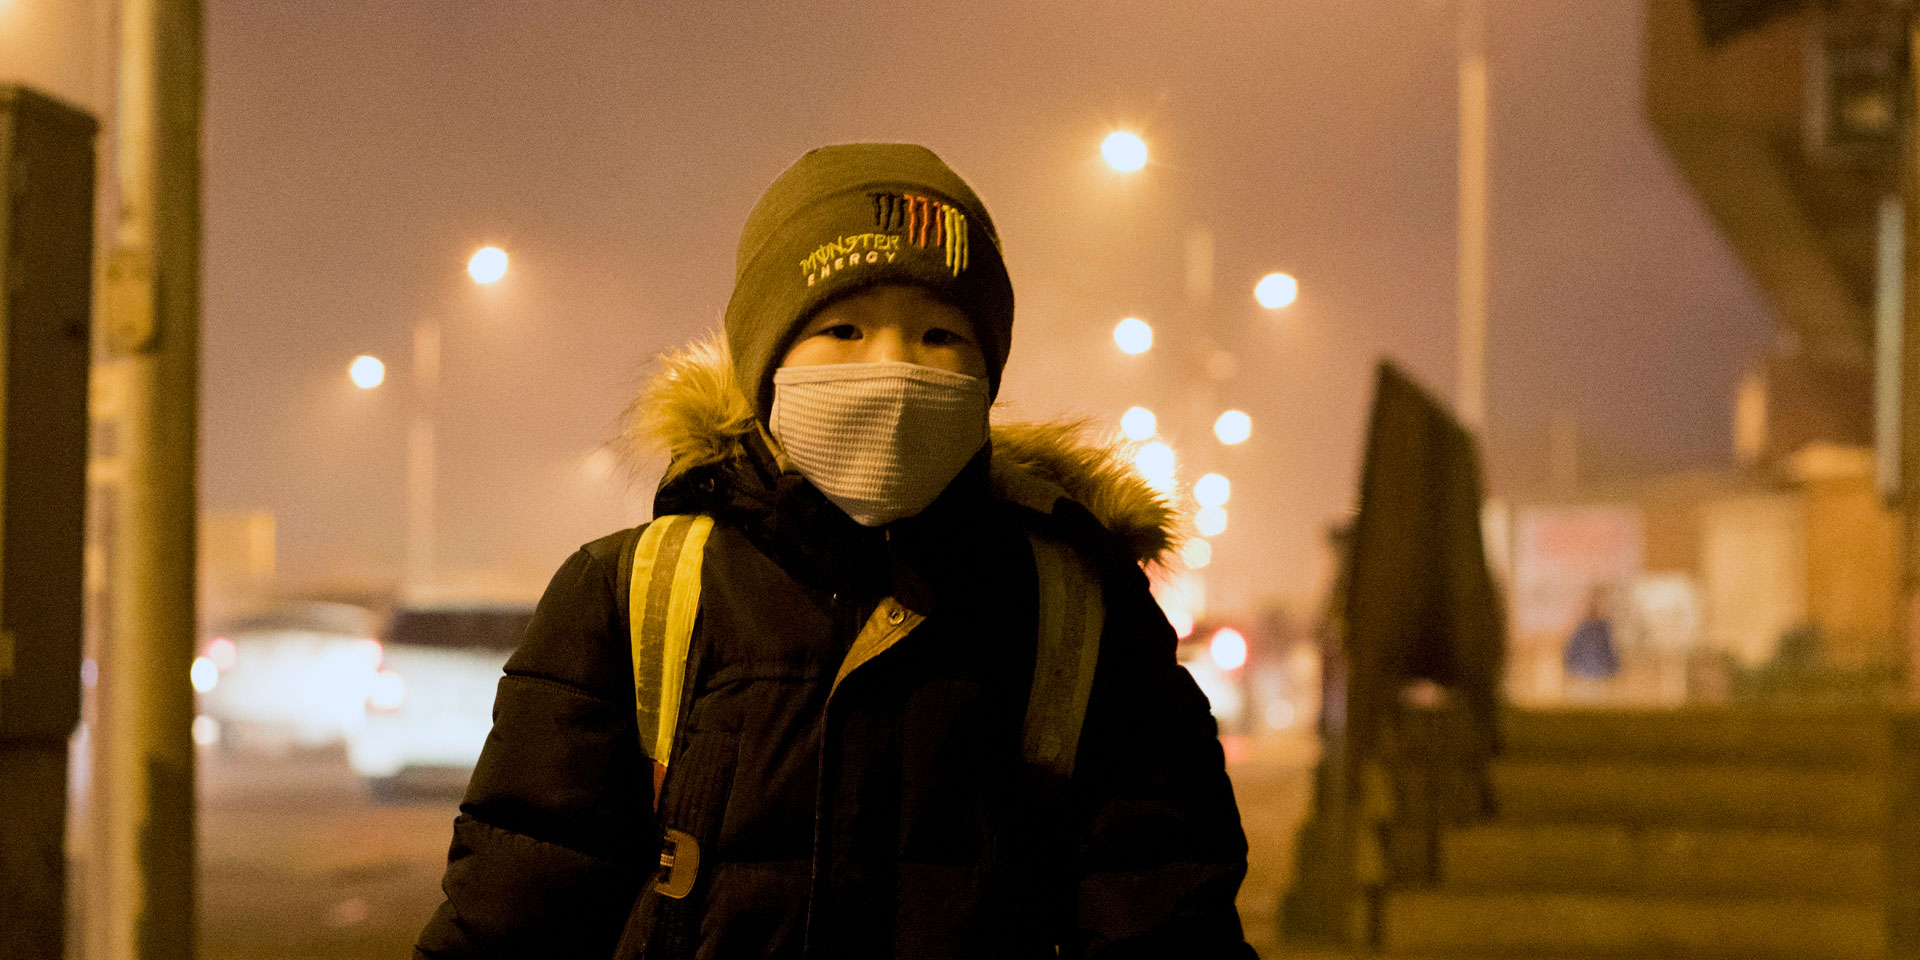 A boy with a school rucksack and face mask stands waiting at a bus stop in Ulaanbaatar.